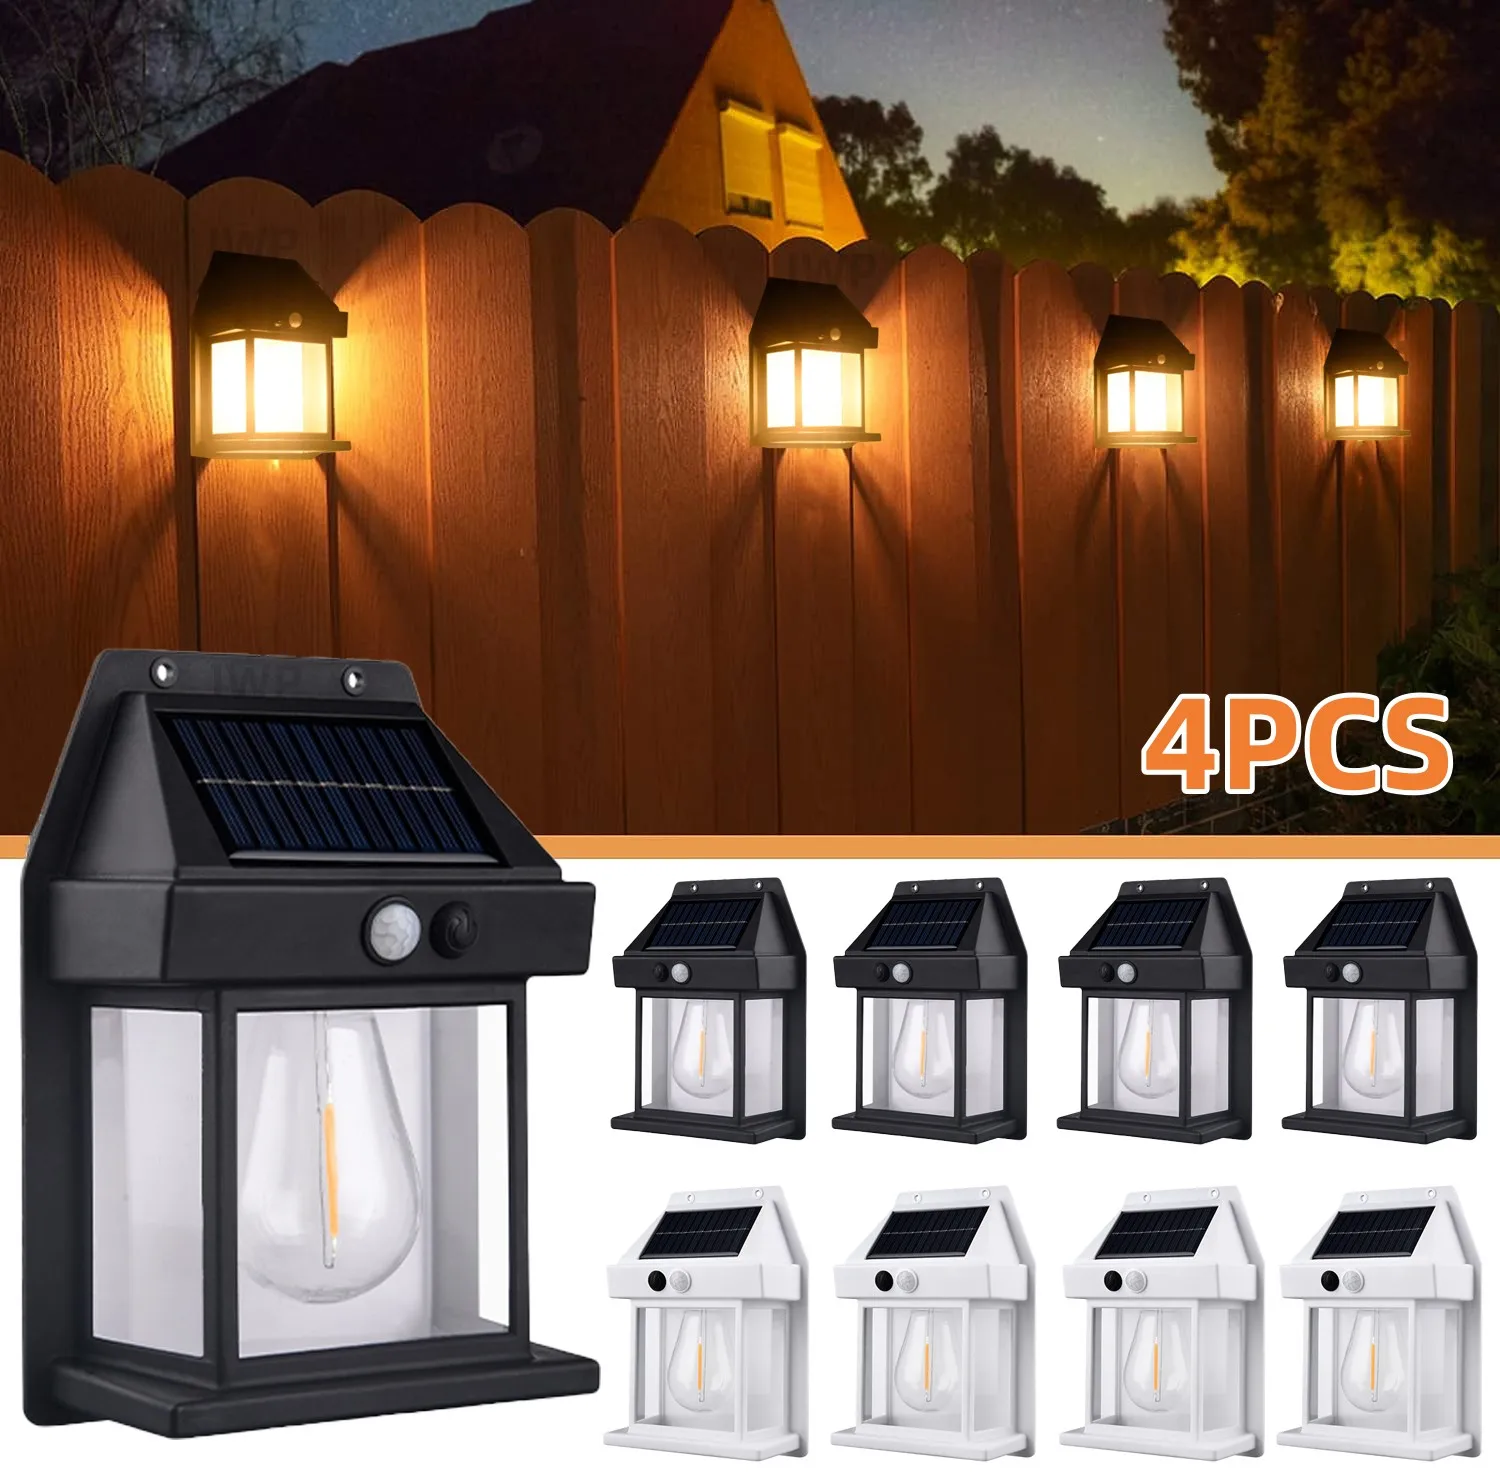 Solar Wall Light Tungsten Waterproof Wireless Motion Sensor Security Lamps Dusk to Dawn Exterior Lighting for Patio Porch Garage